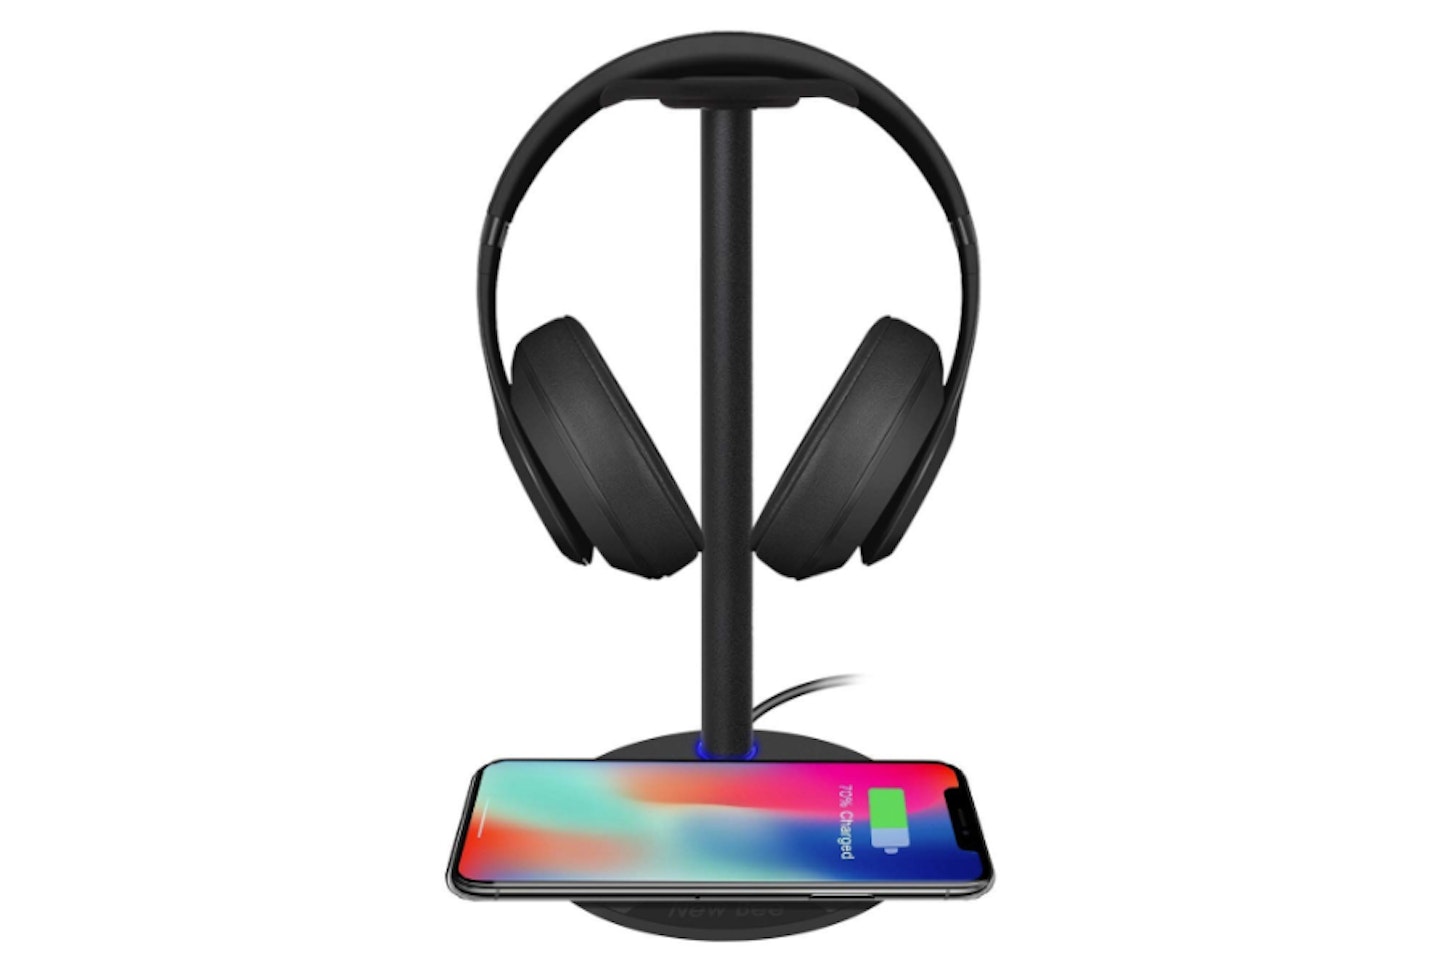 New-Bee Headphone Stand with Wireless Charging, £12.99